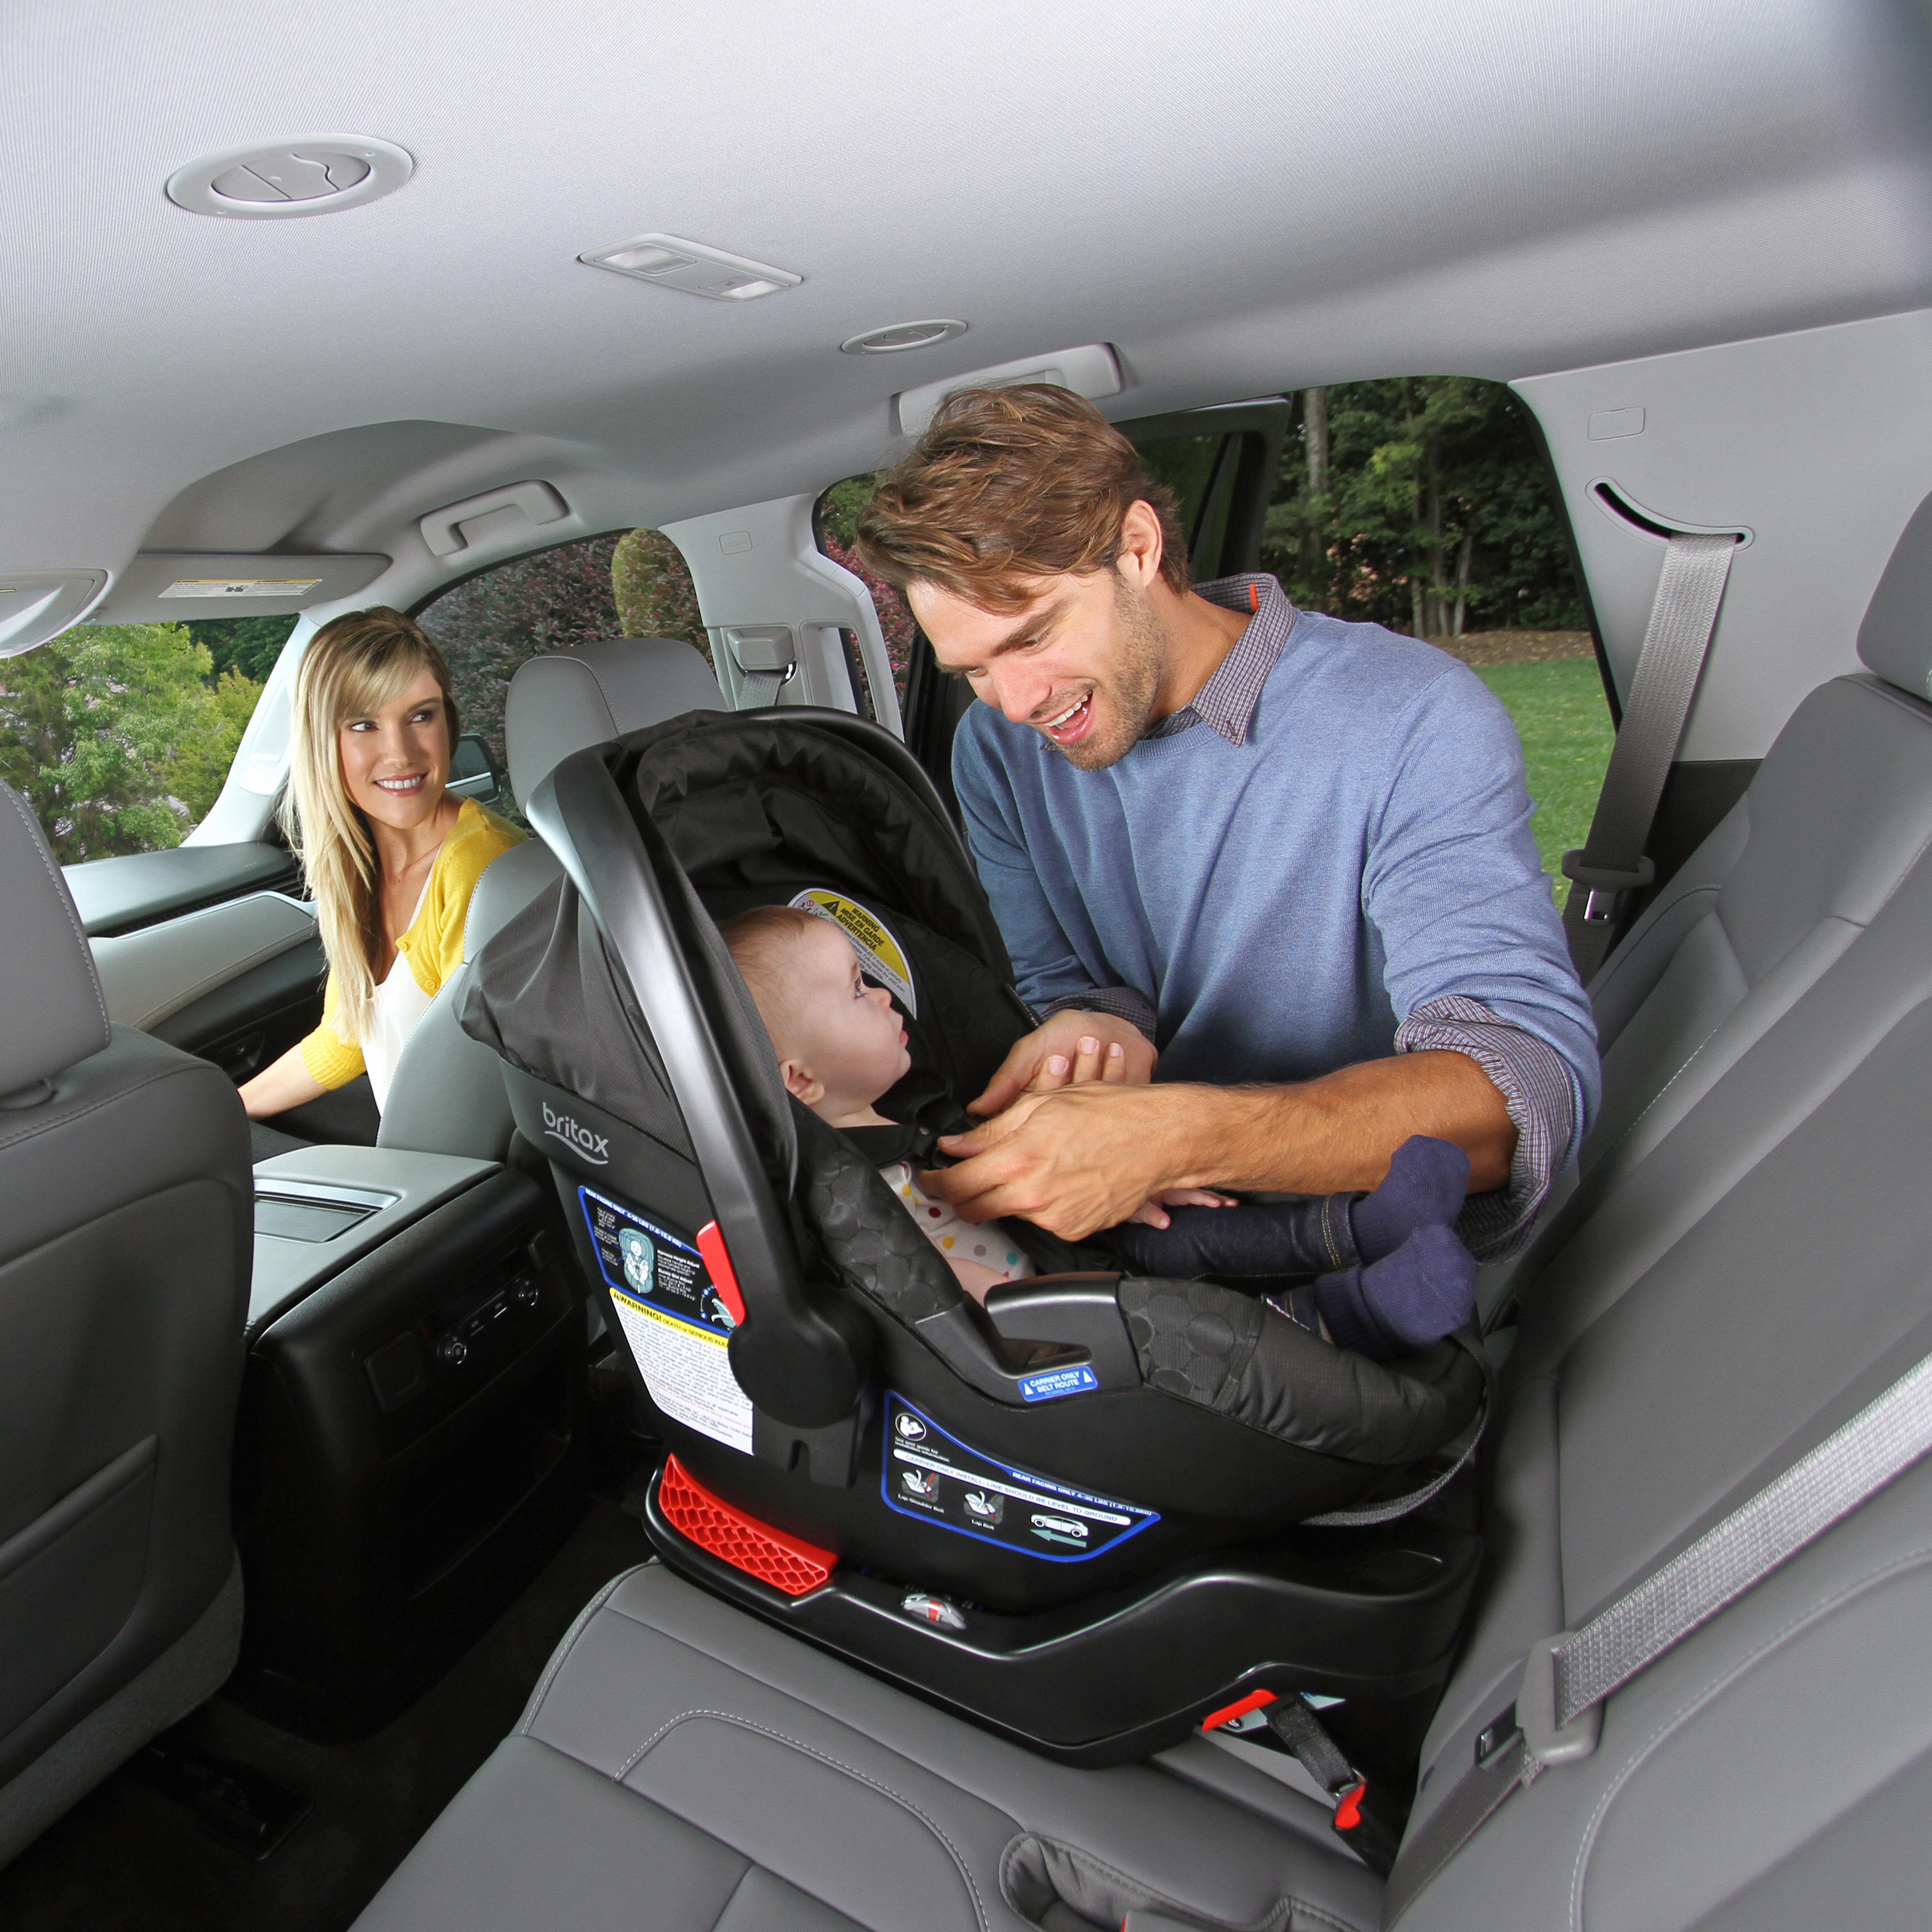 Purchase Britax Baby Car Seat Instructions Up To 62 Off - Britax B Safe Car Seat Strap Adjustment